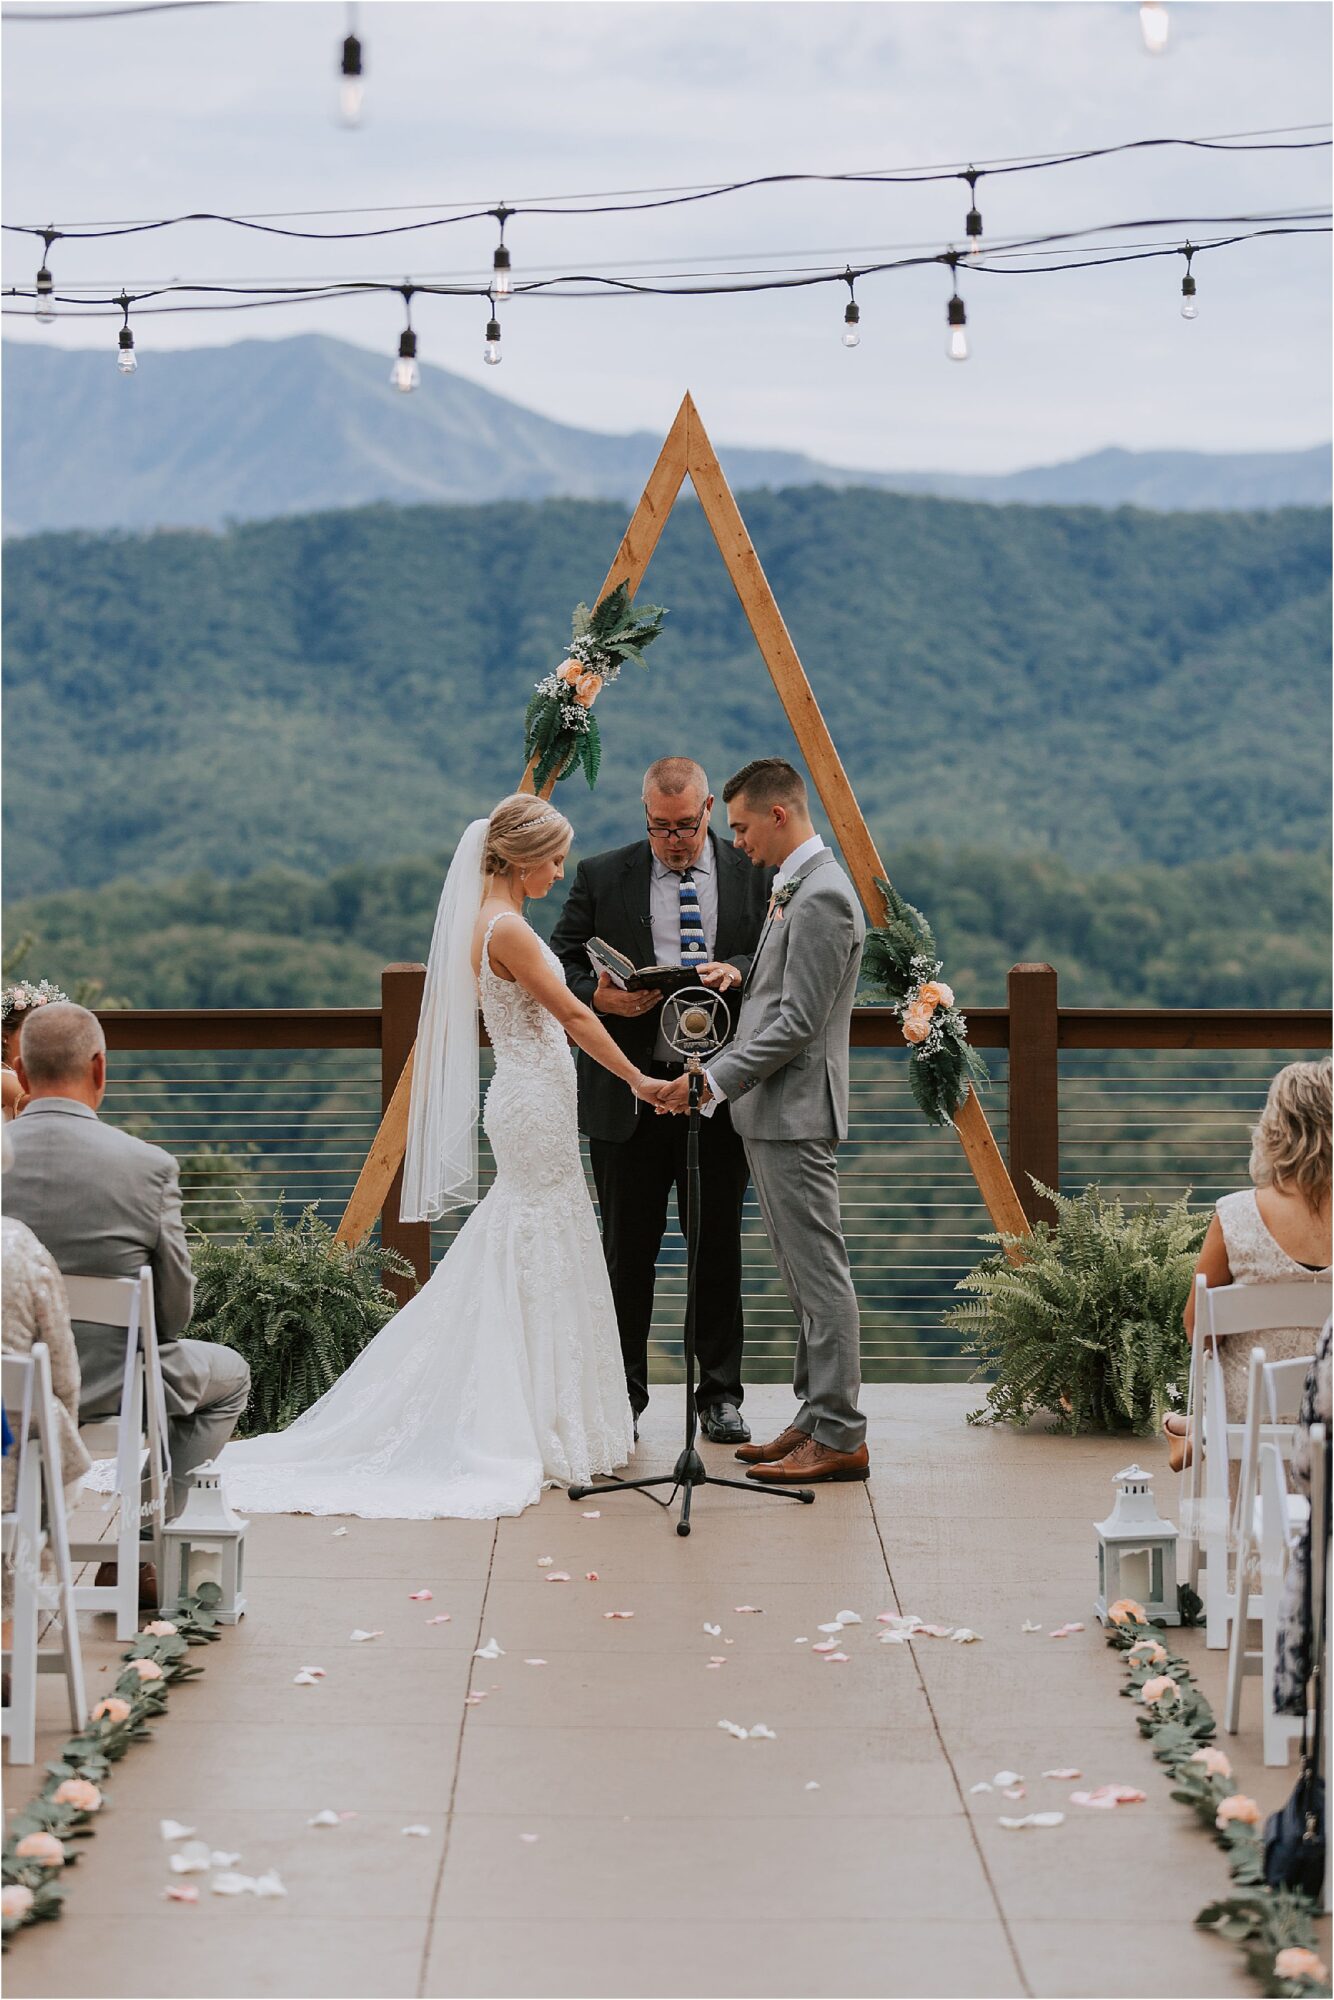 ceremony overlooking mountains with triangle wedding arbor